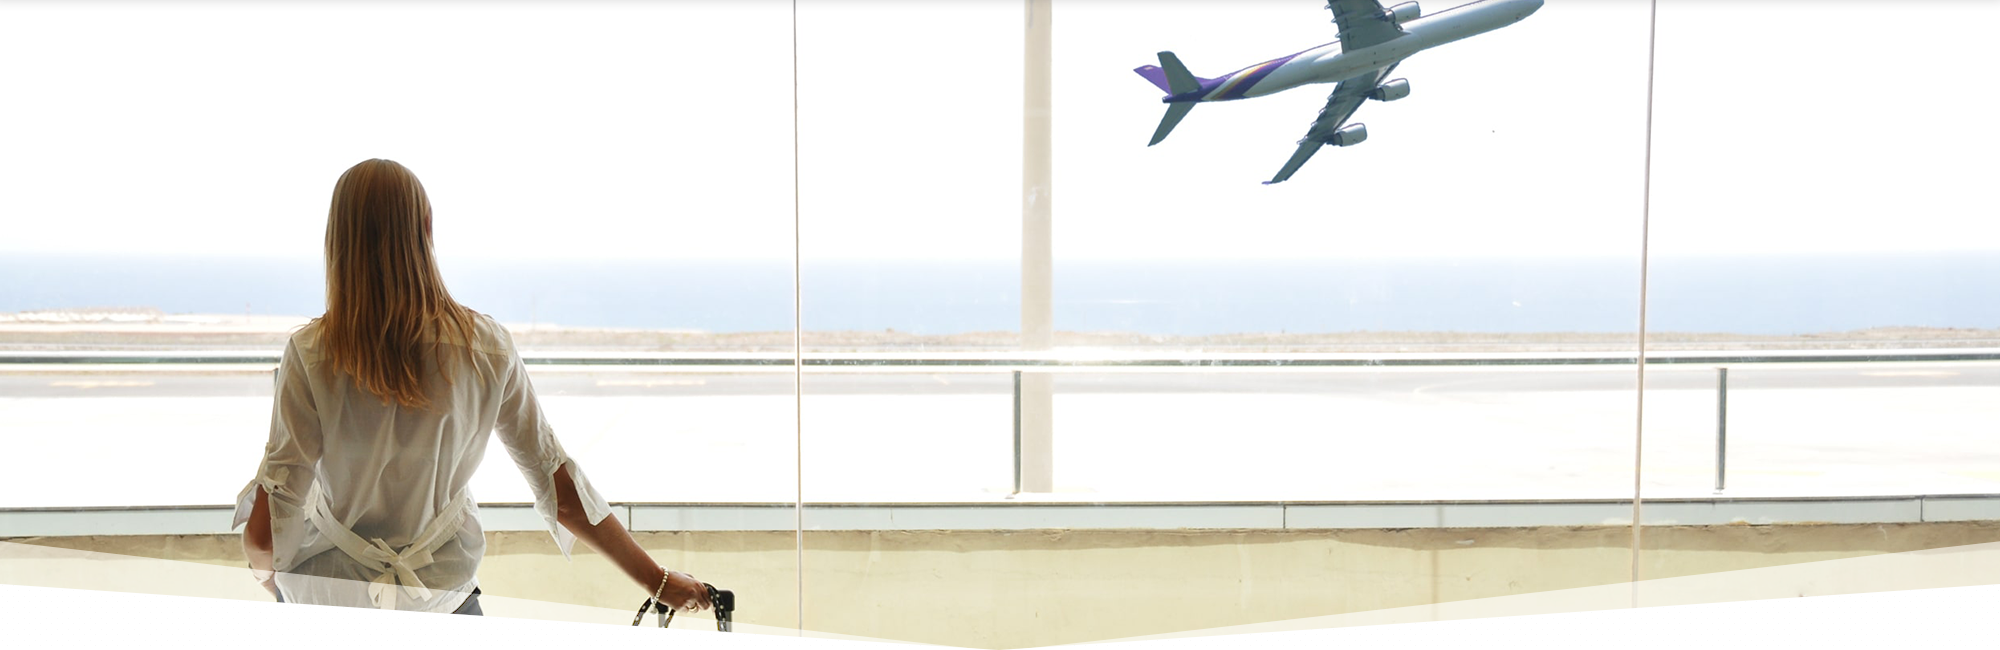 Woman Seeing an Airplane